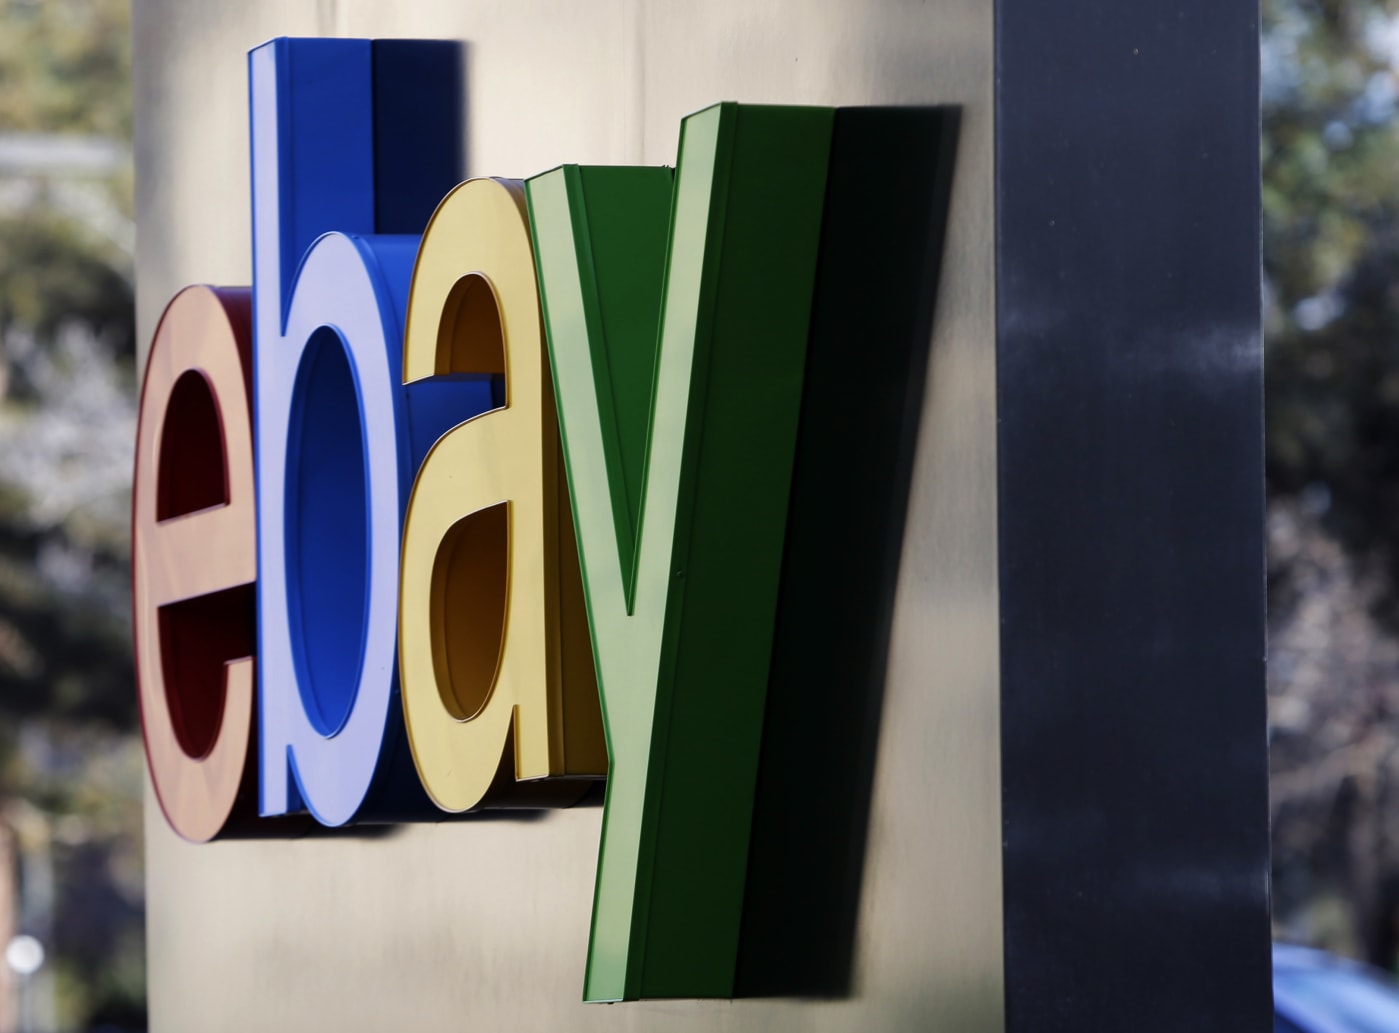 eBay will pay $3 million to resolve criminal charges in a bizarre cyberstalking case